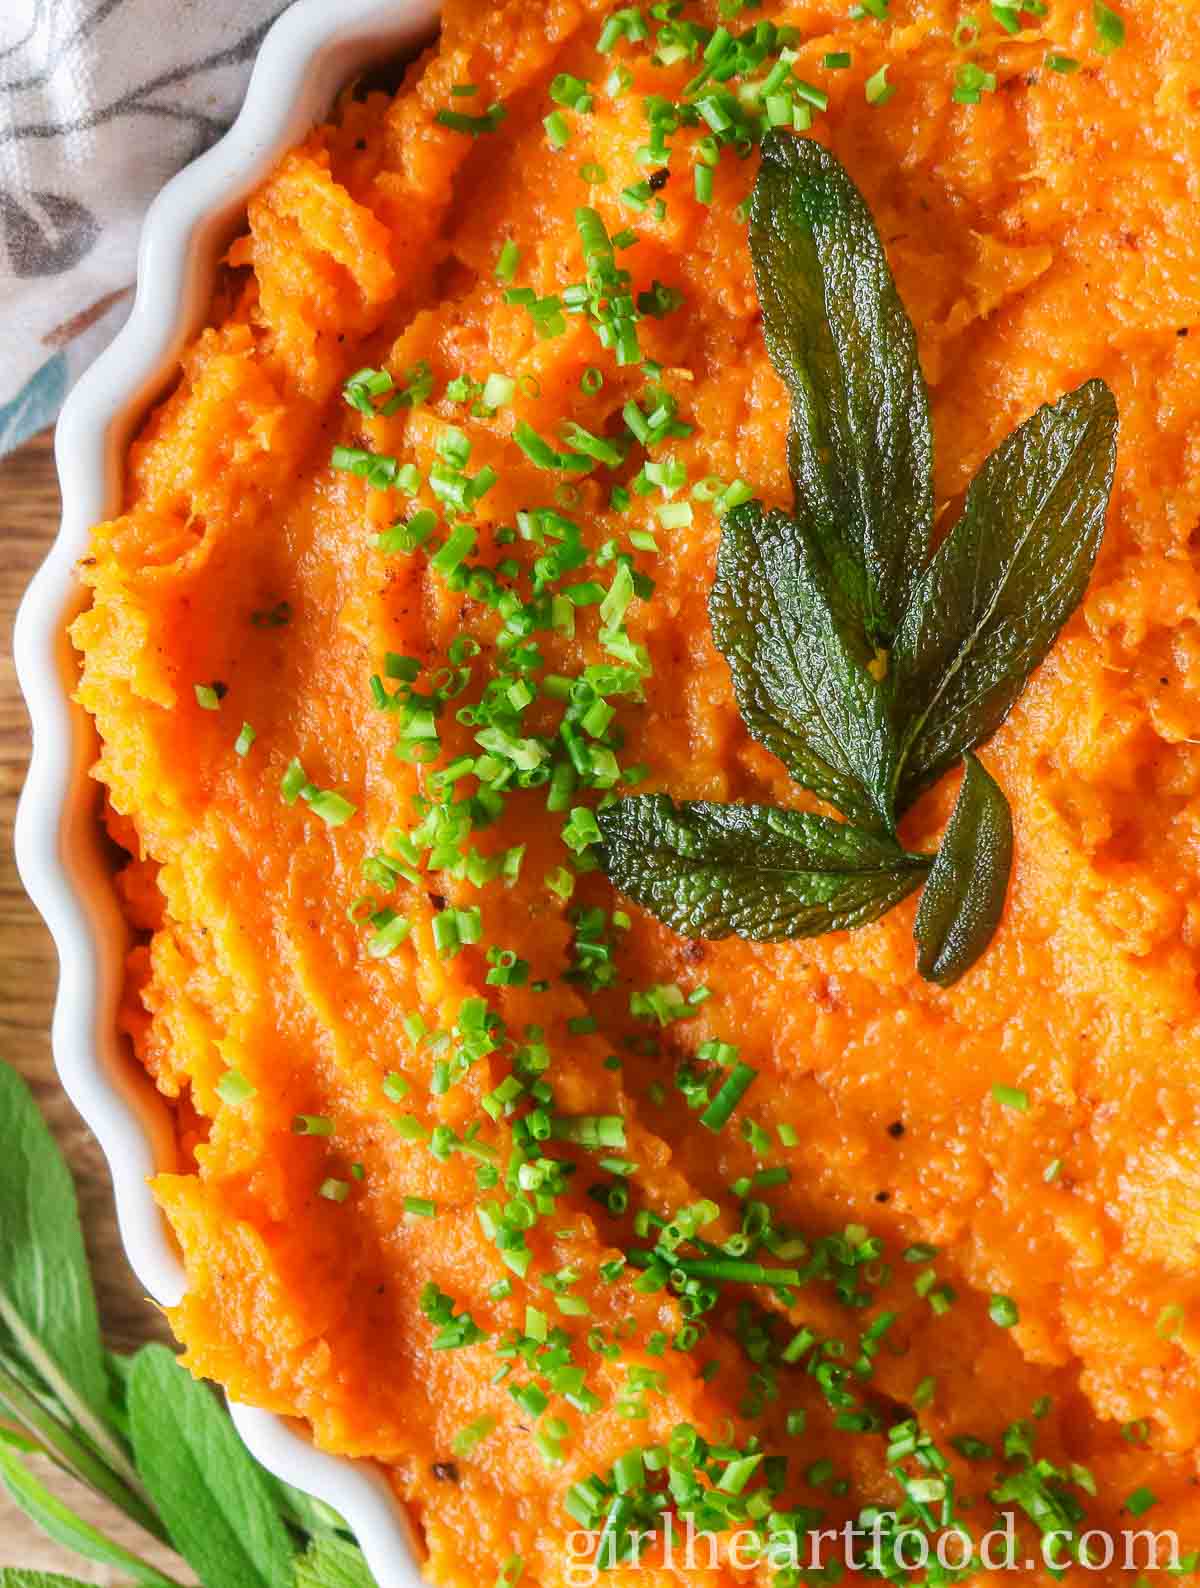 Close-up of mashed butternut squash & sweet potato garnished with chives & sage leaves.